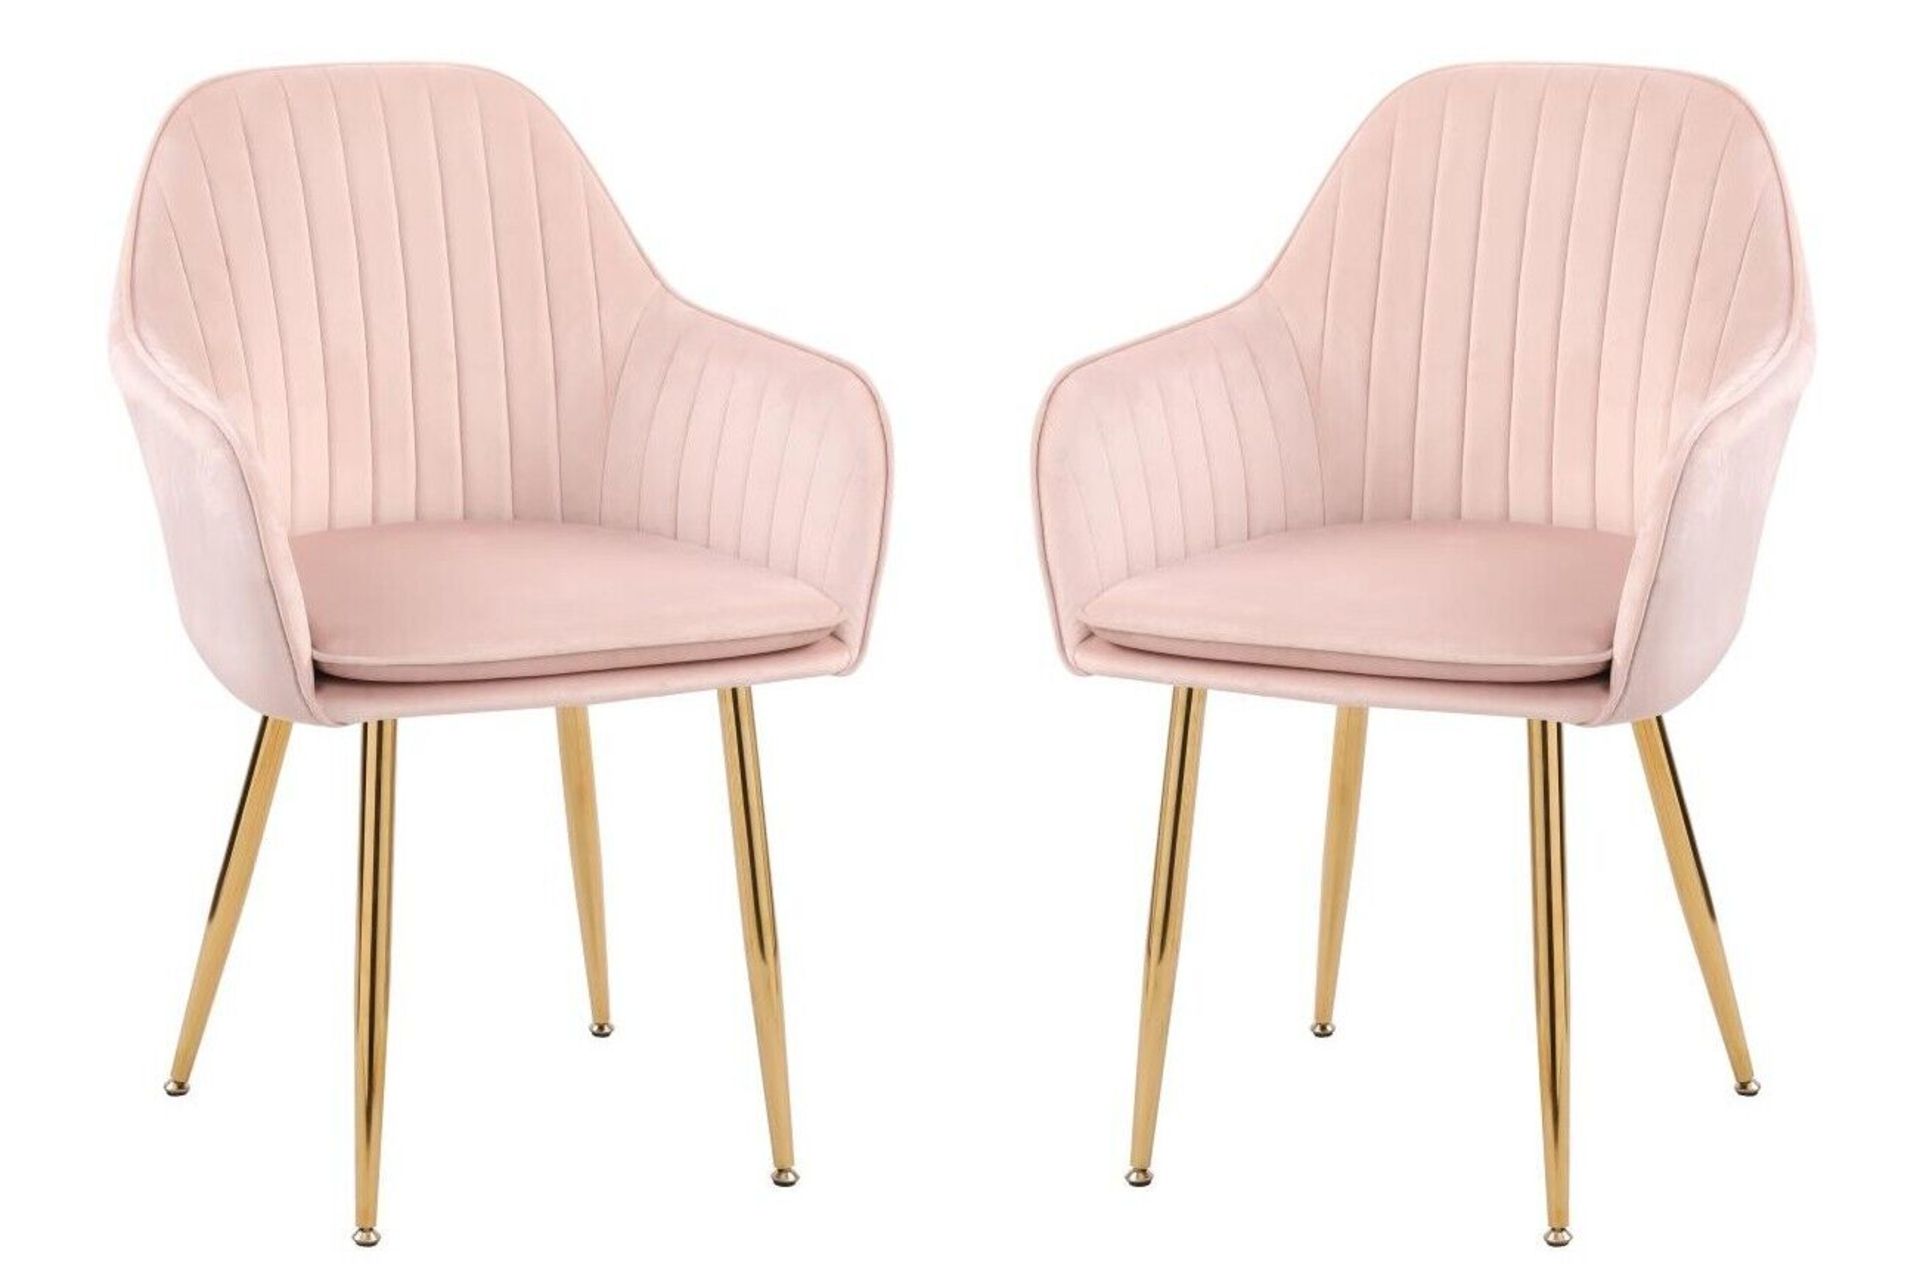 PAIR OF DESIGNER STYLISH PINK DINING CHAIRS - VELVET SEAT CUSHION GOLD LEGS RRP £249